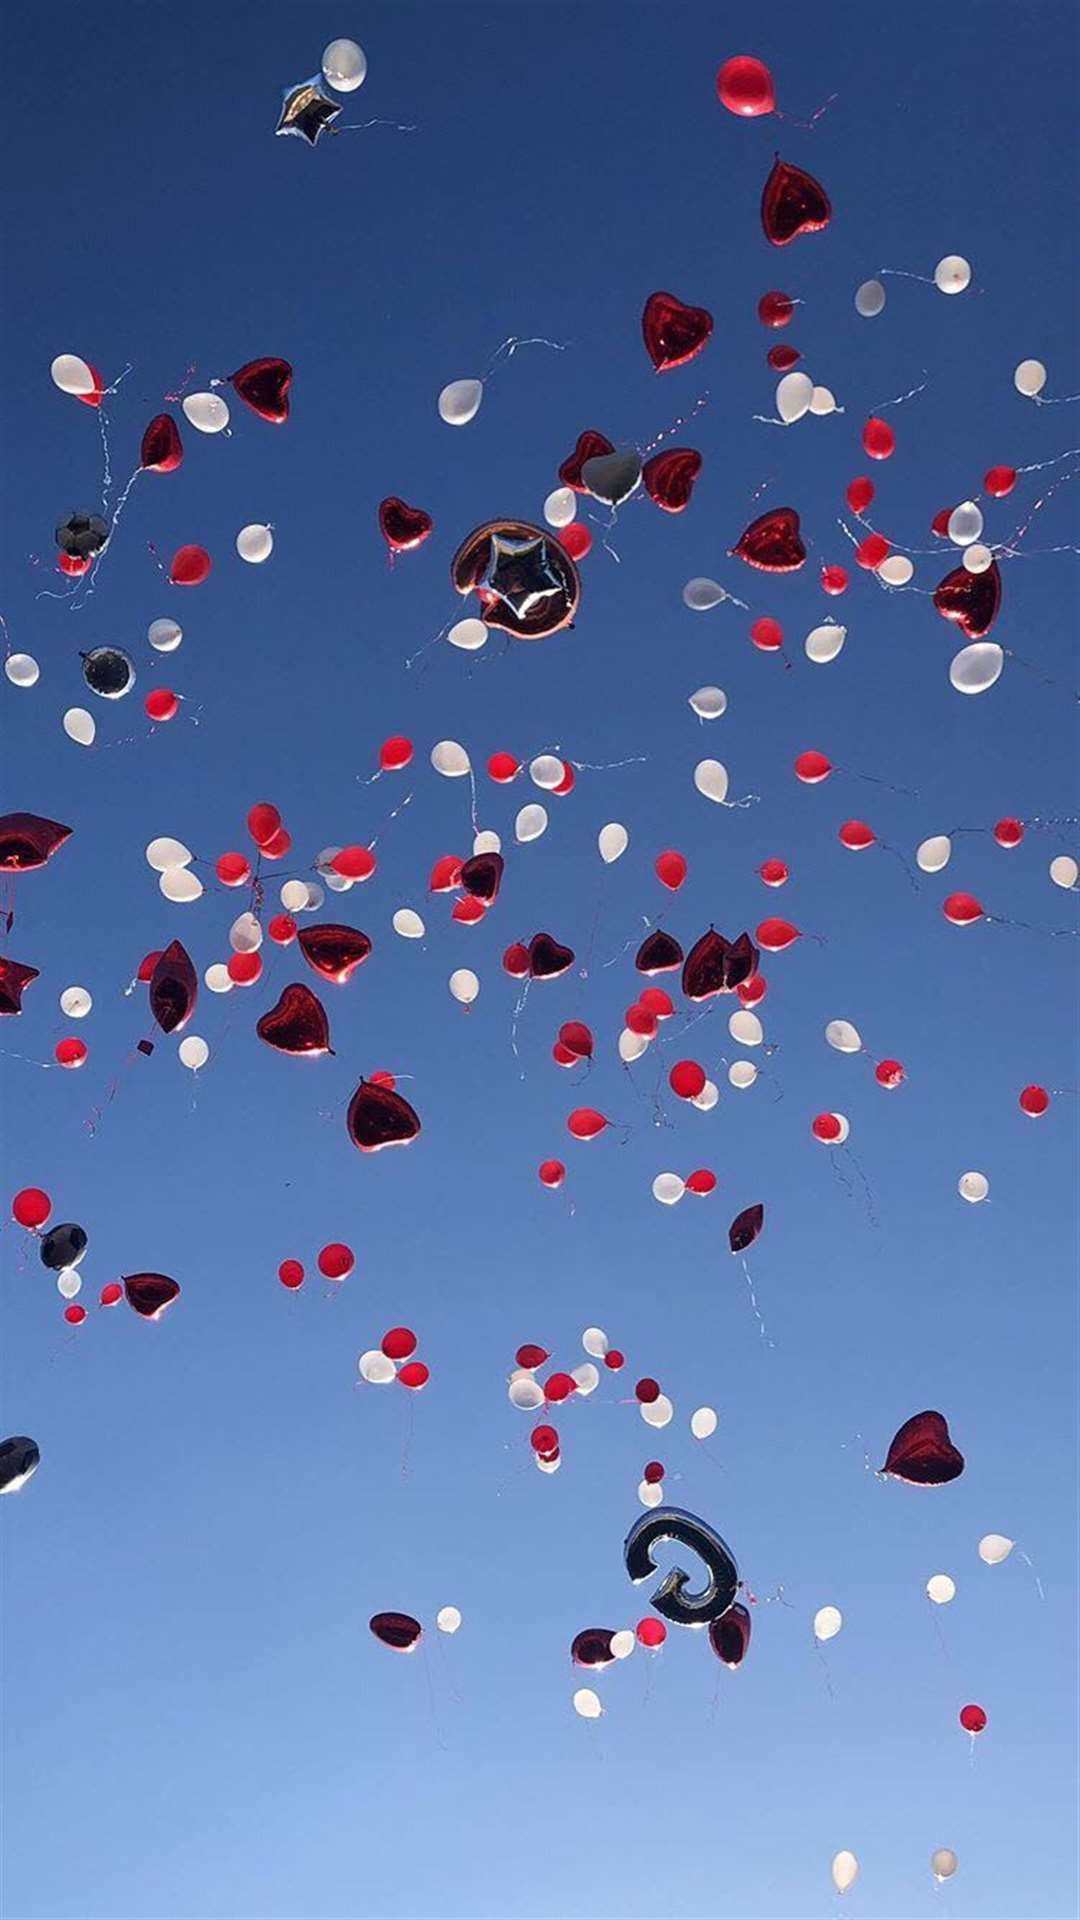 George Buckley's friends and family let off balloons in Gravesend last night